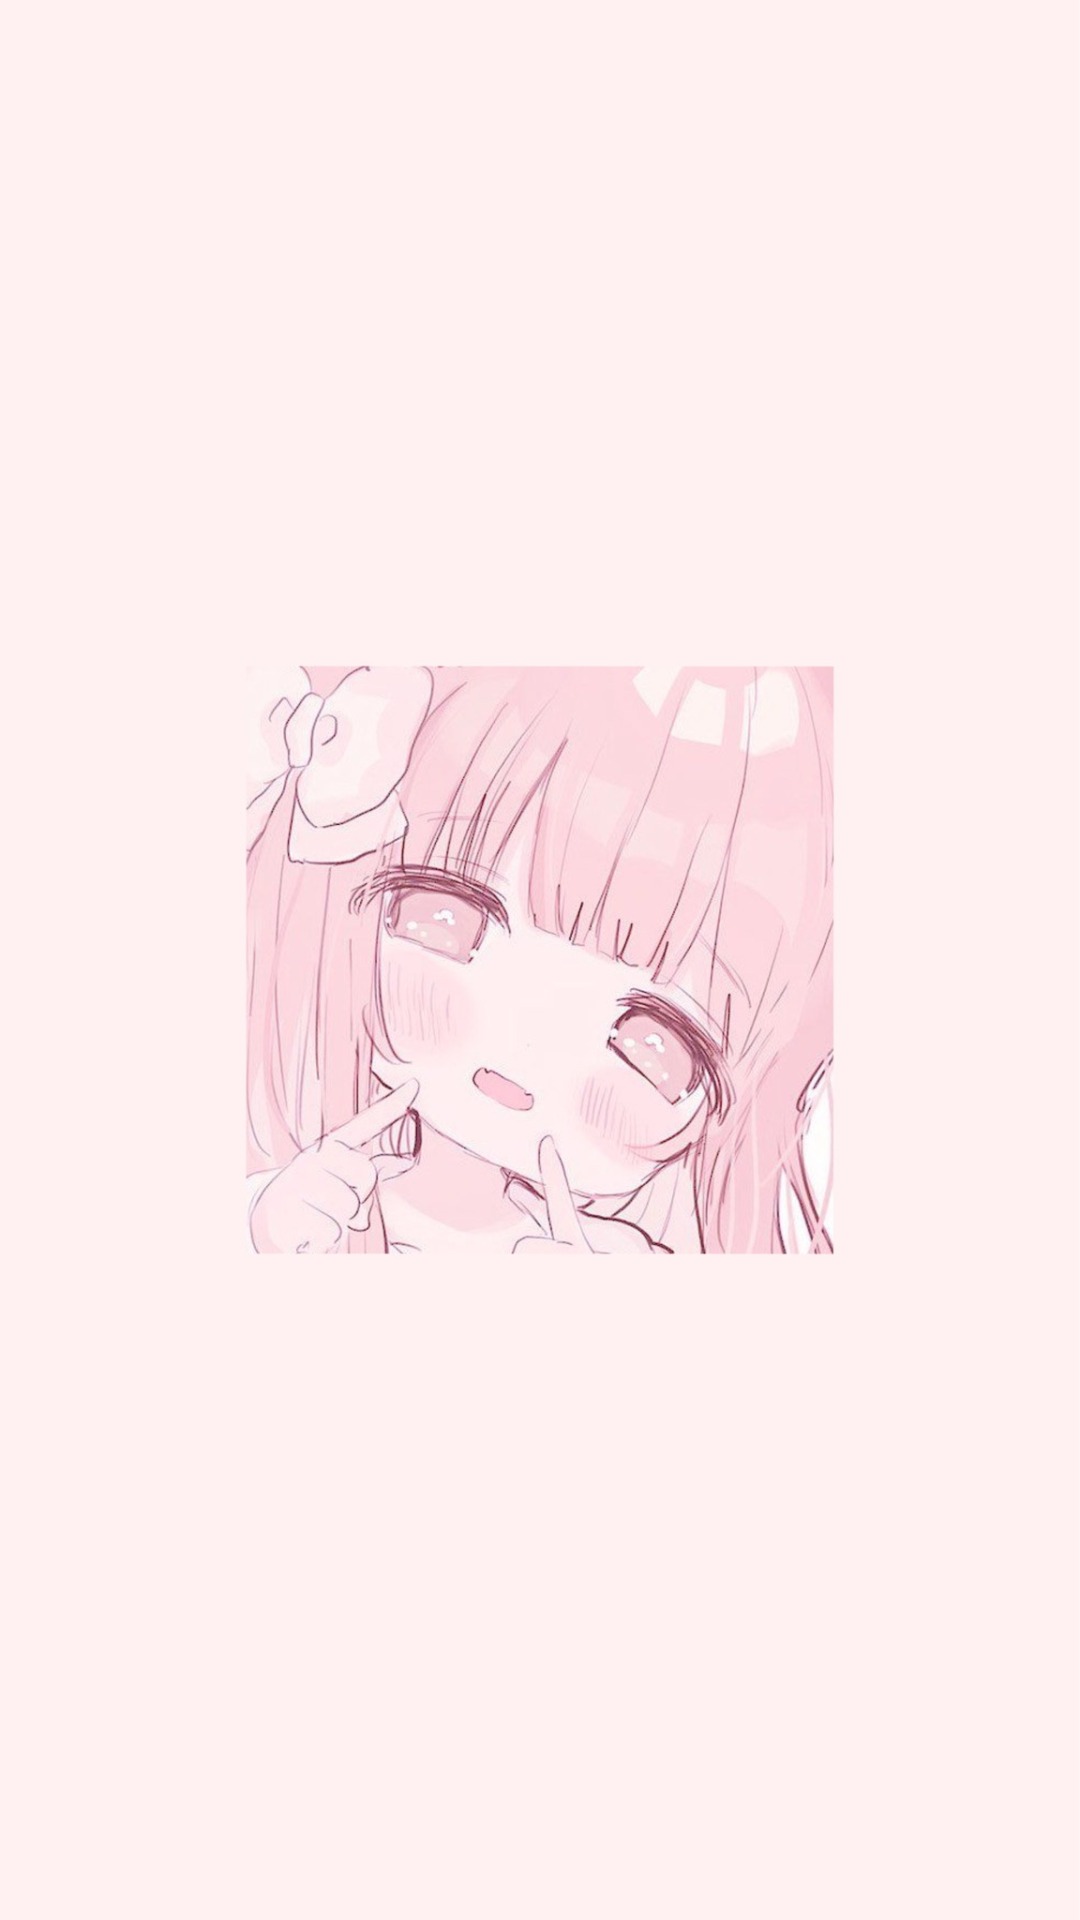 Download Aesthetic Pink Anime Girl Cute Poses Wallpaper | Wallpapers.com